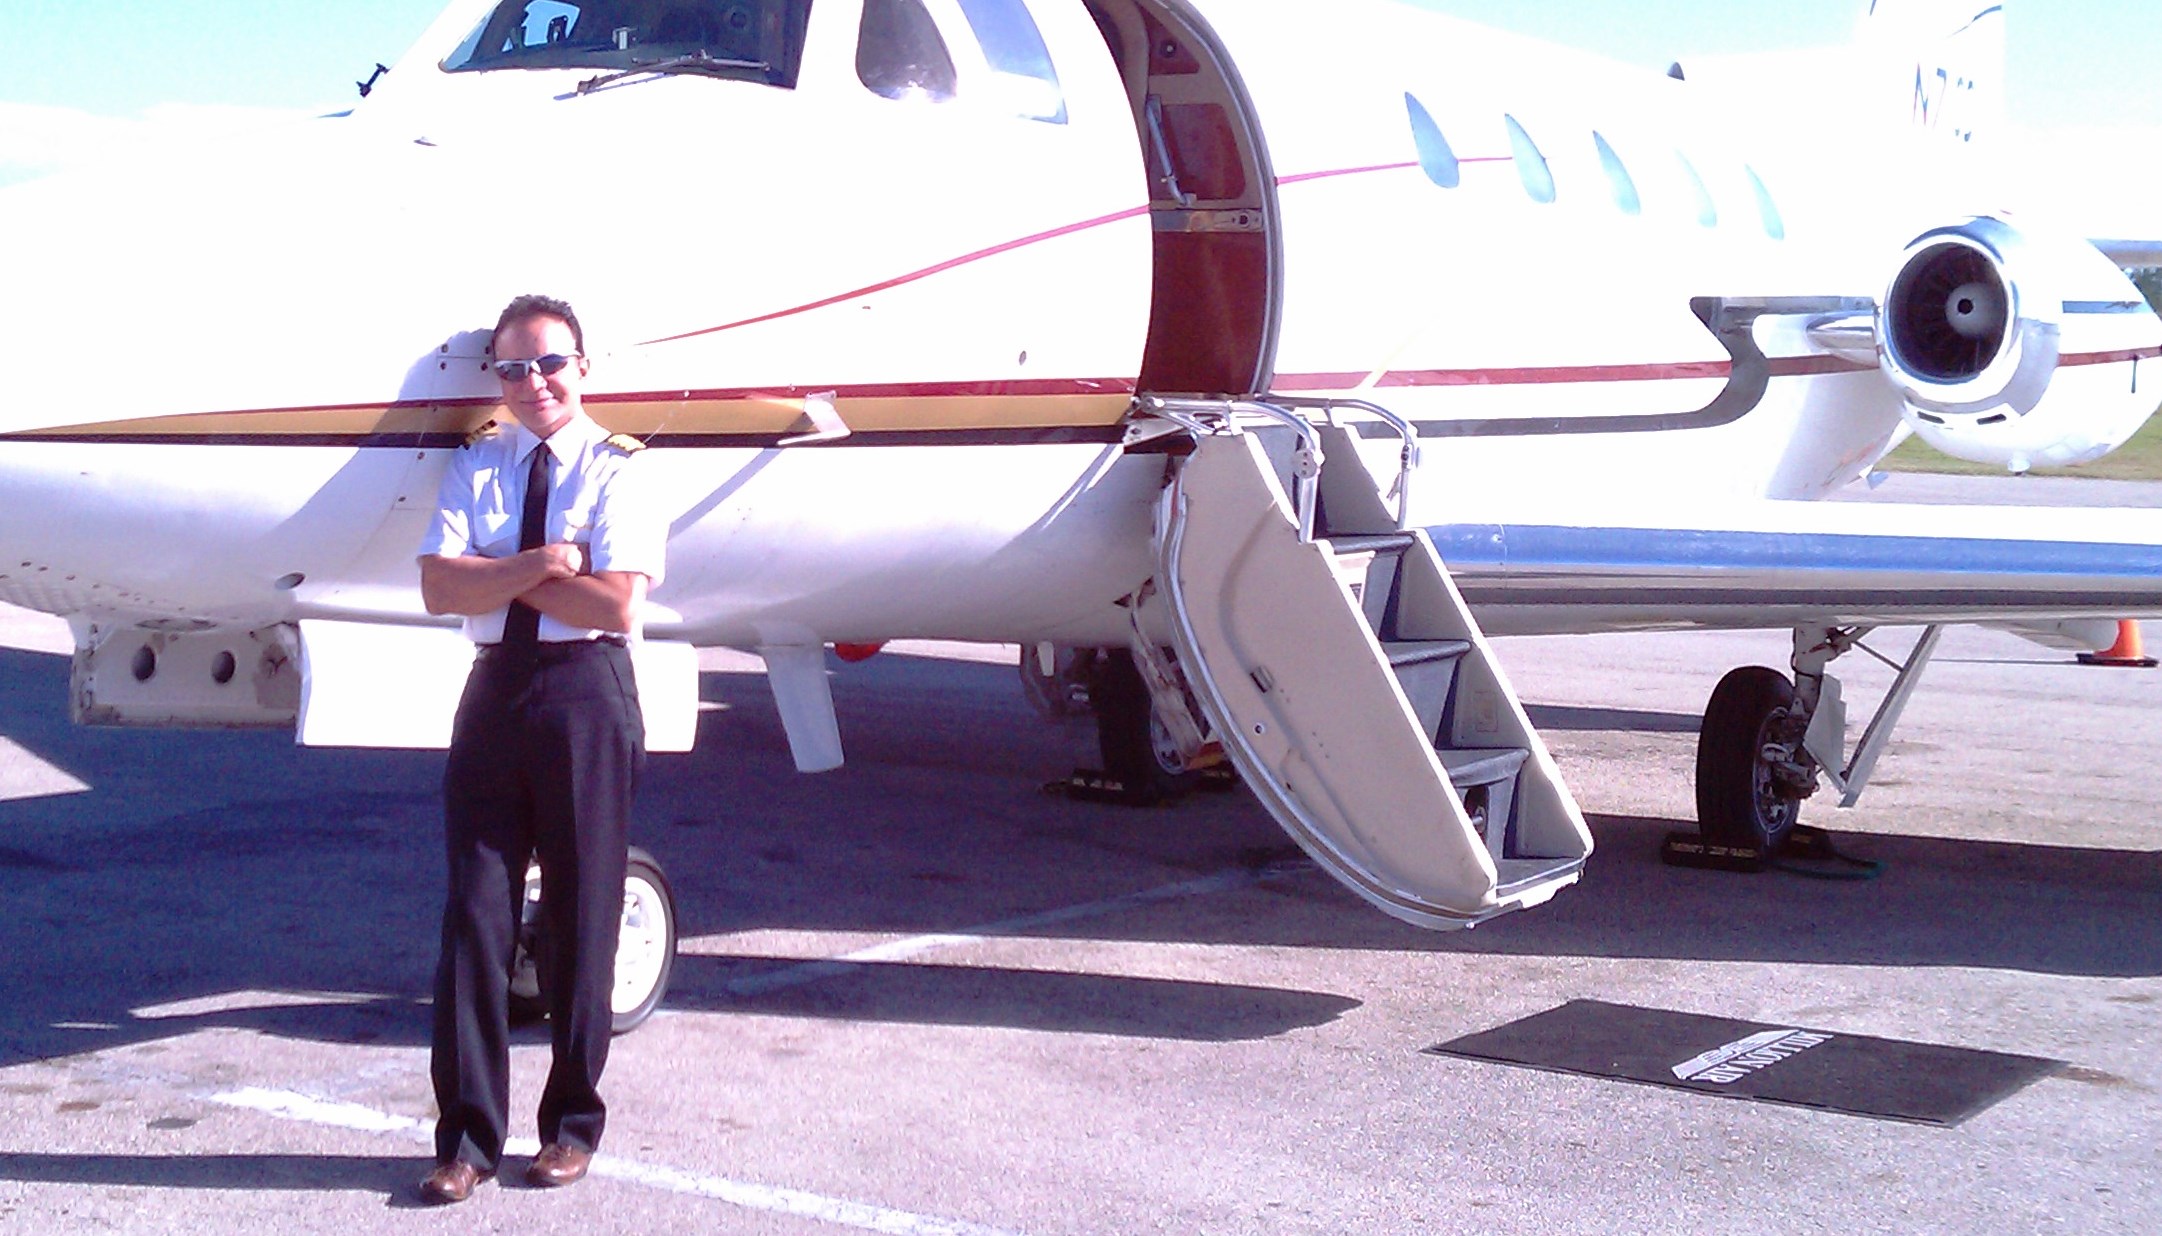 Gus Maestrales, Director of Jet Management & Acquisitions